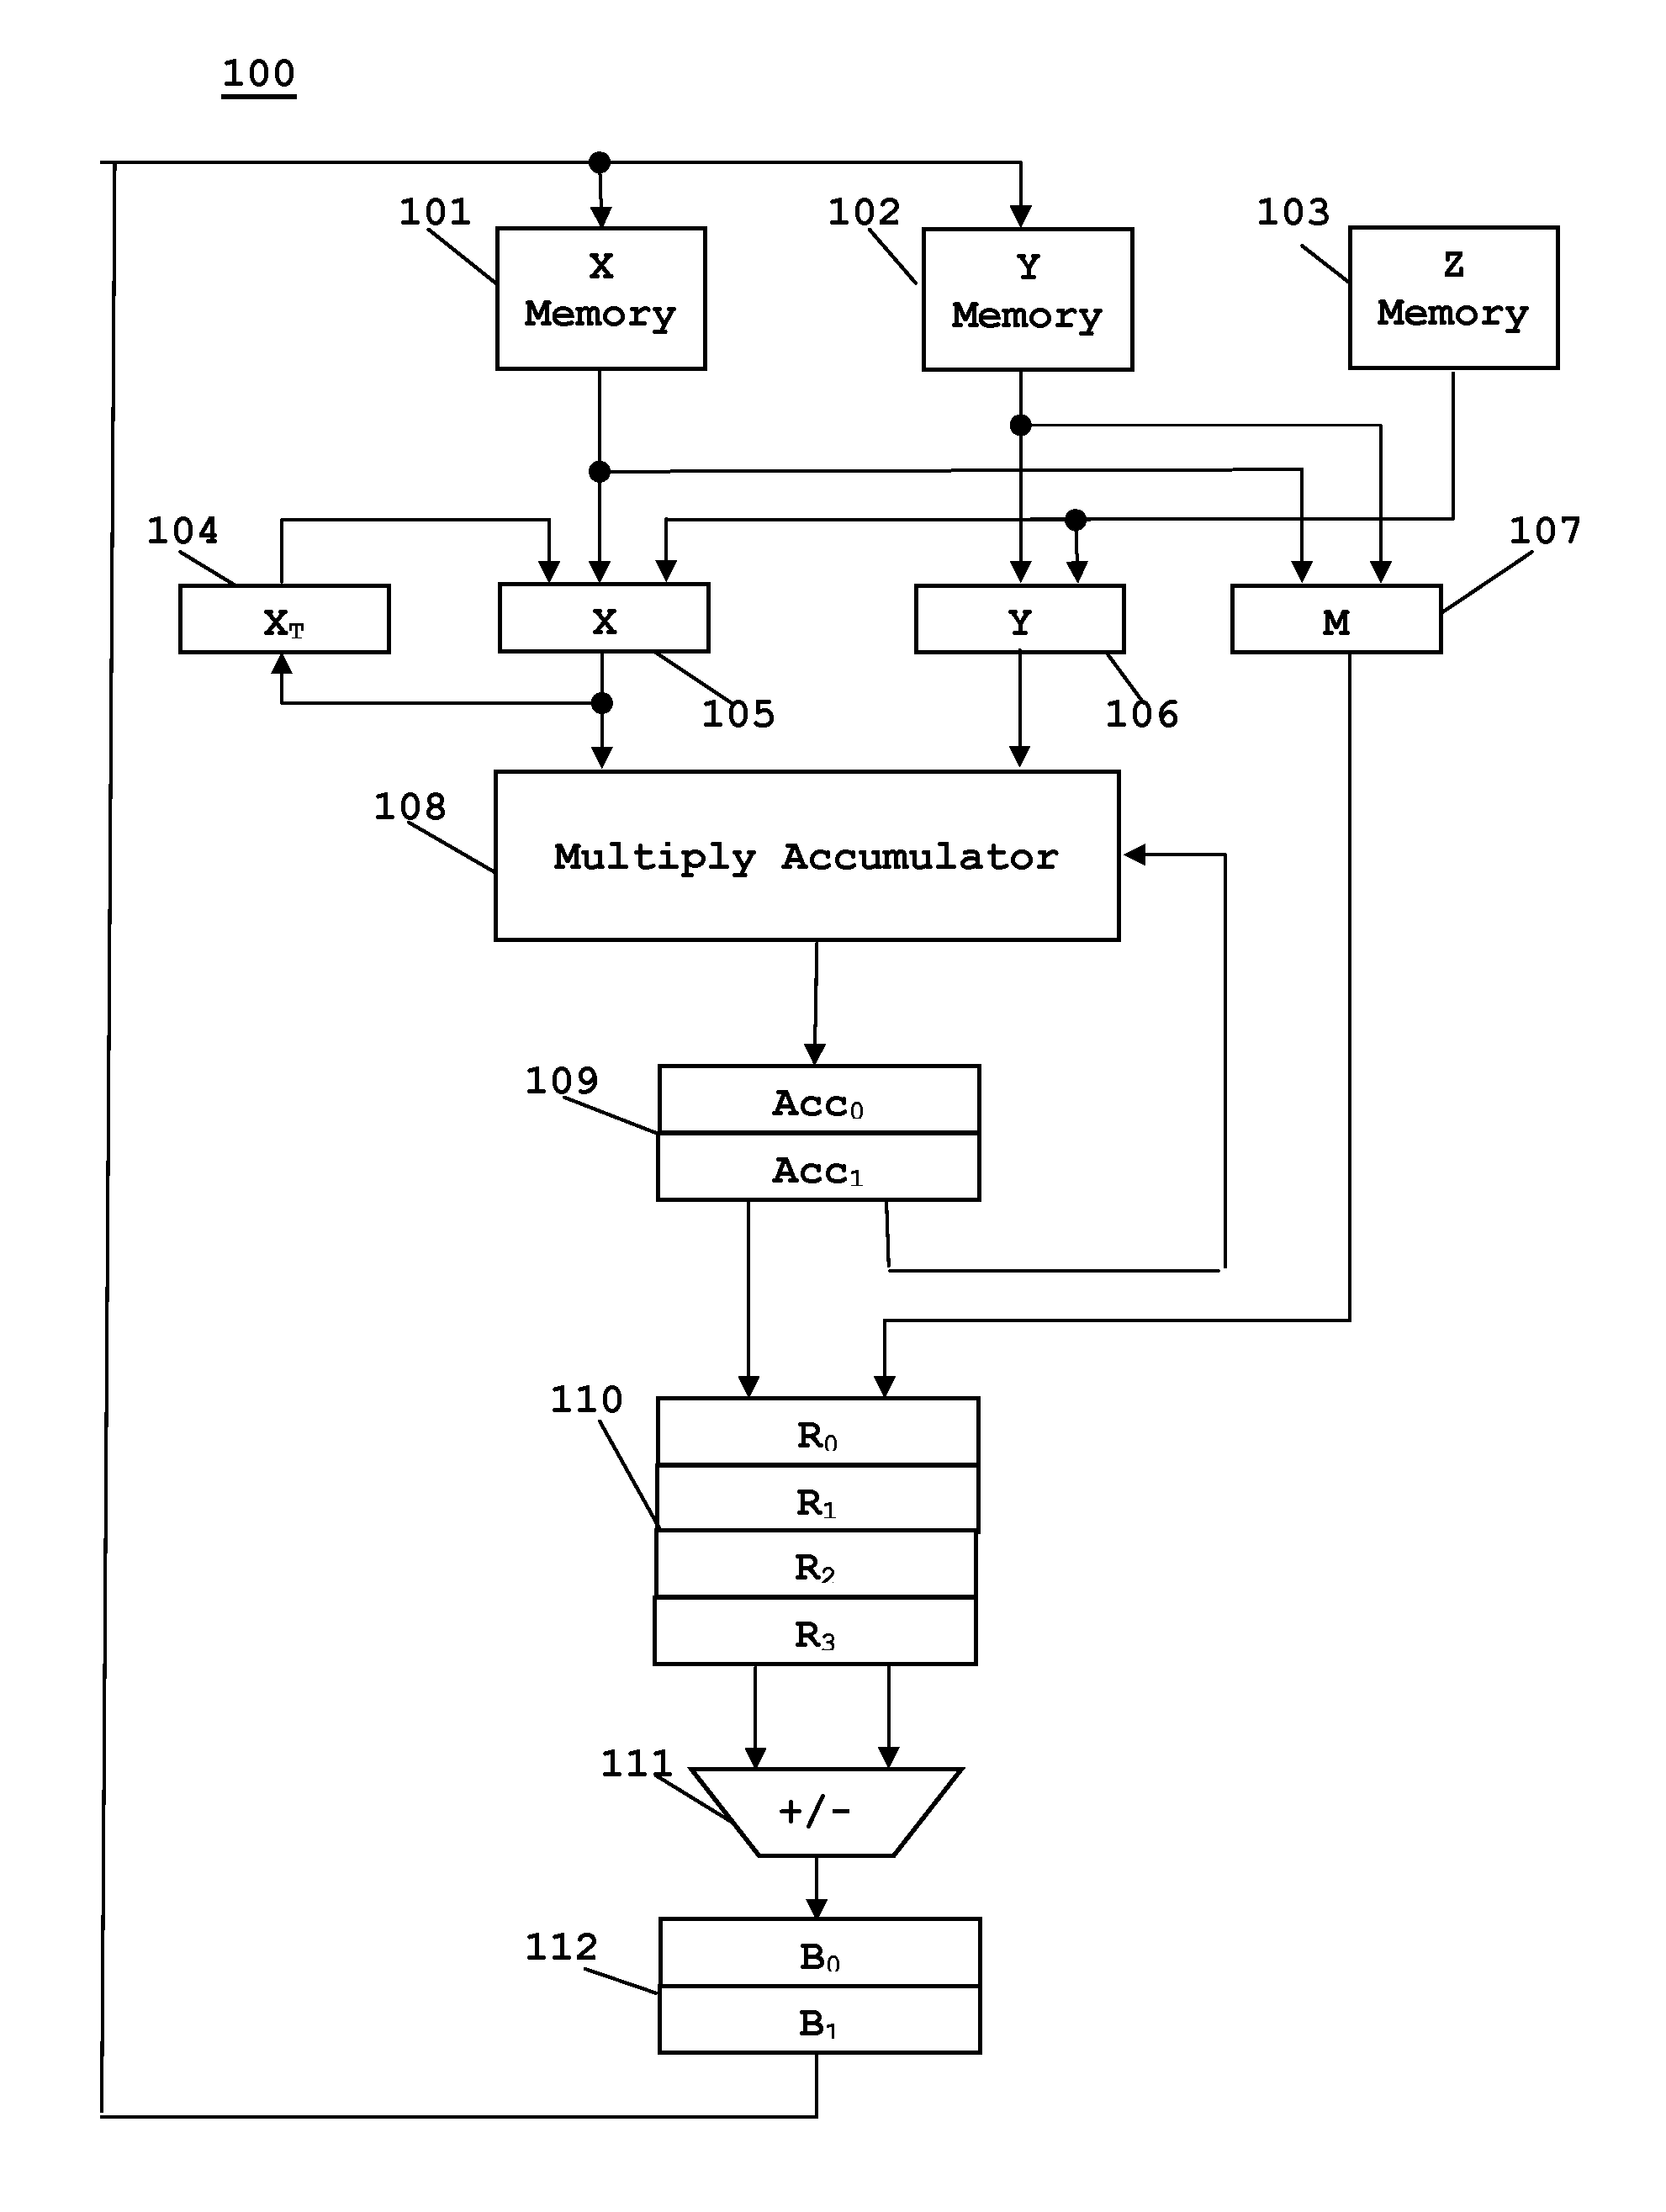 High performance implementation of the FFT butterfly computation